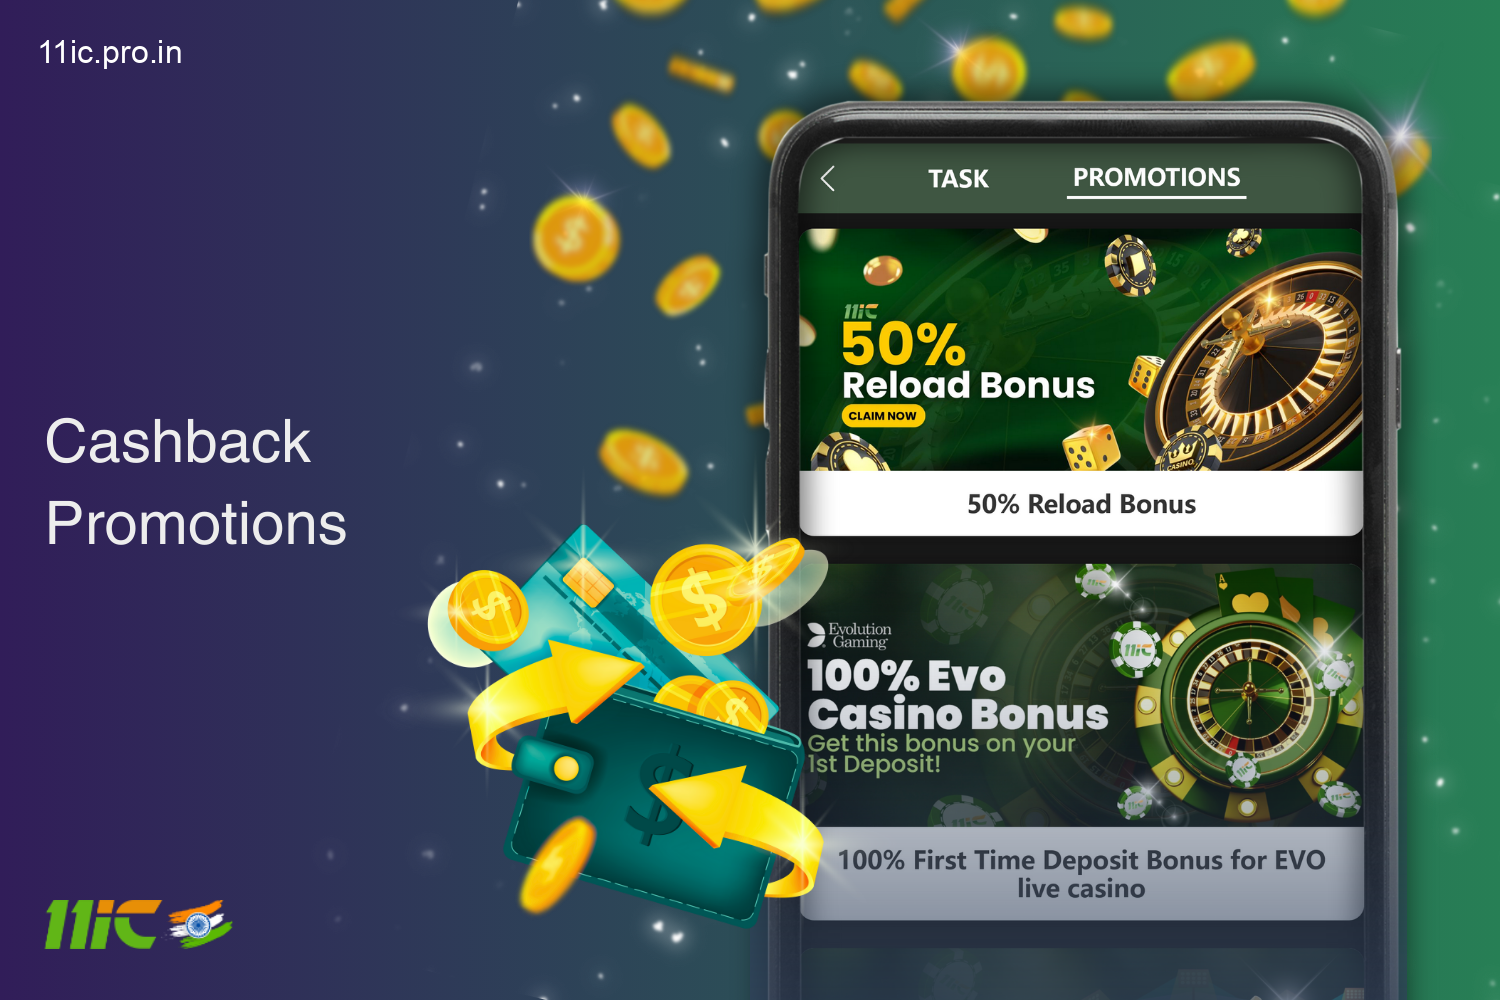 Get cashback on bets and payments - regular offers for 11ic Indian players